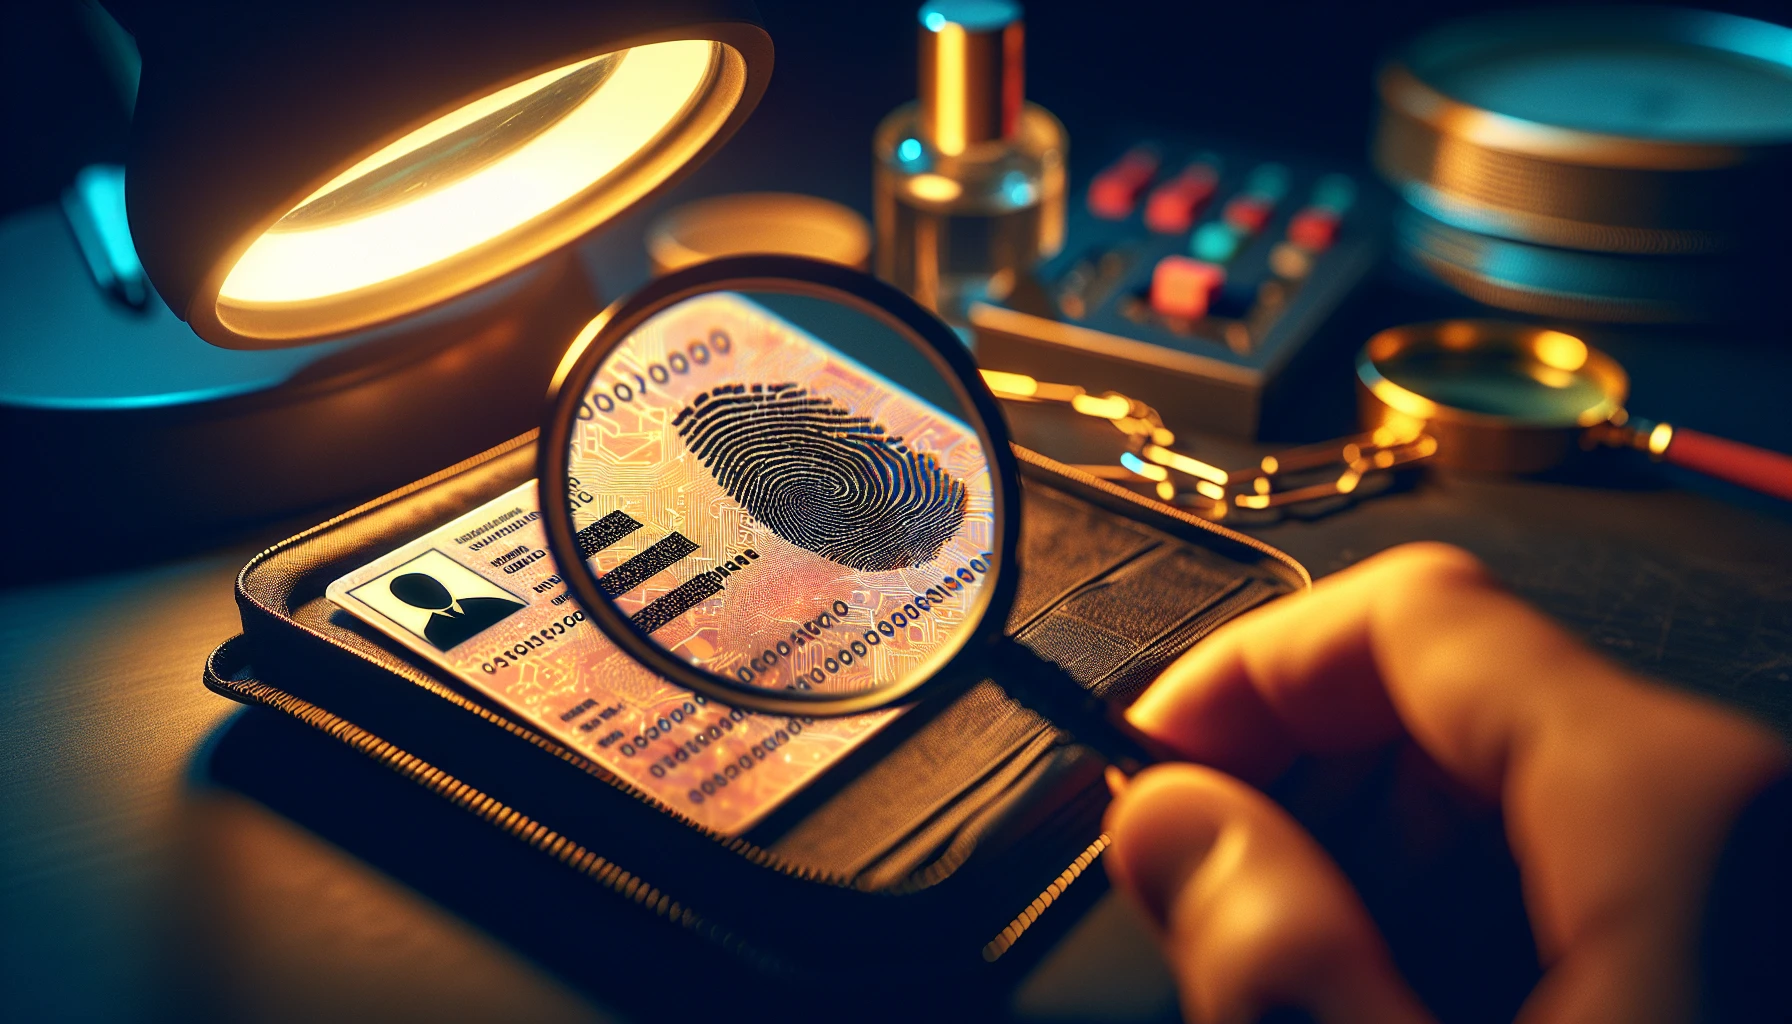 A magnifying glass inspecting a fake ID for security features